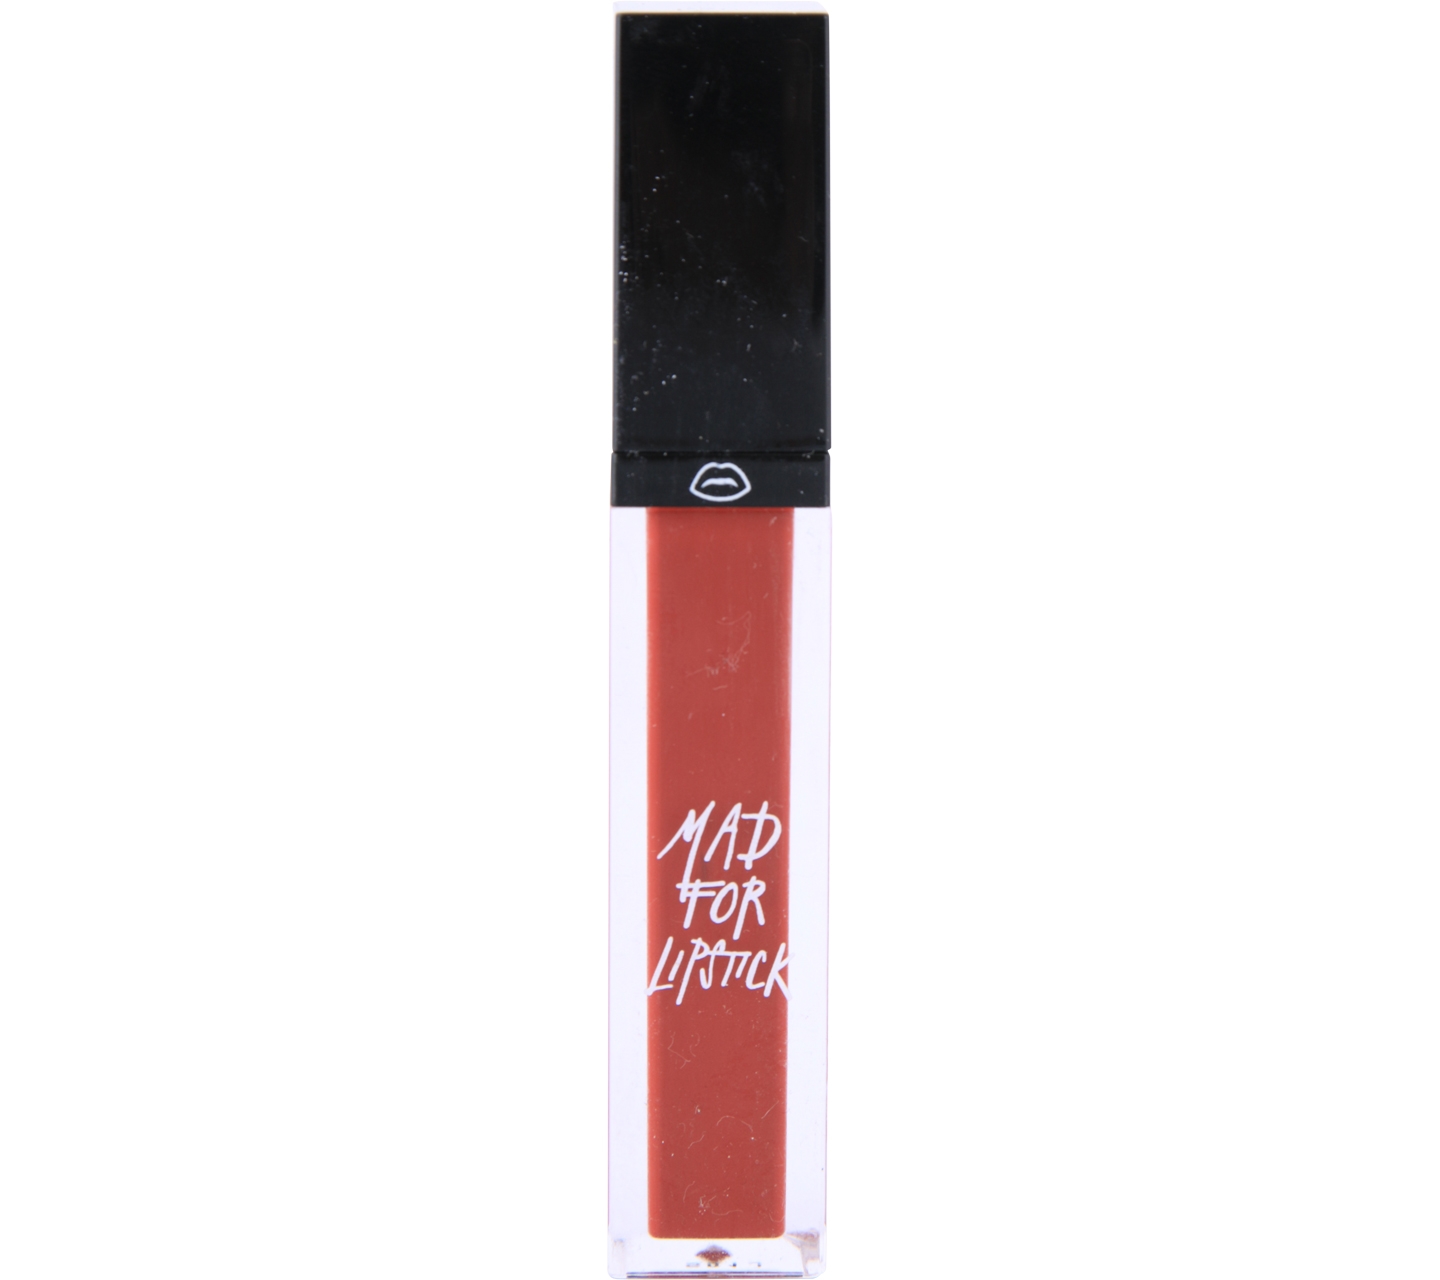 MAD For Lipstick Femme Fatale Lips